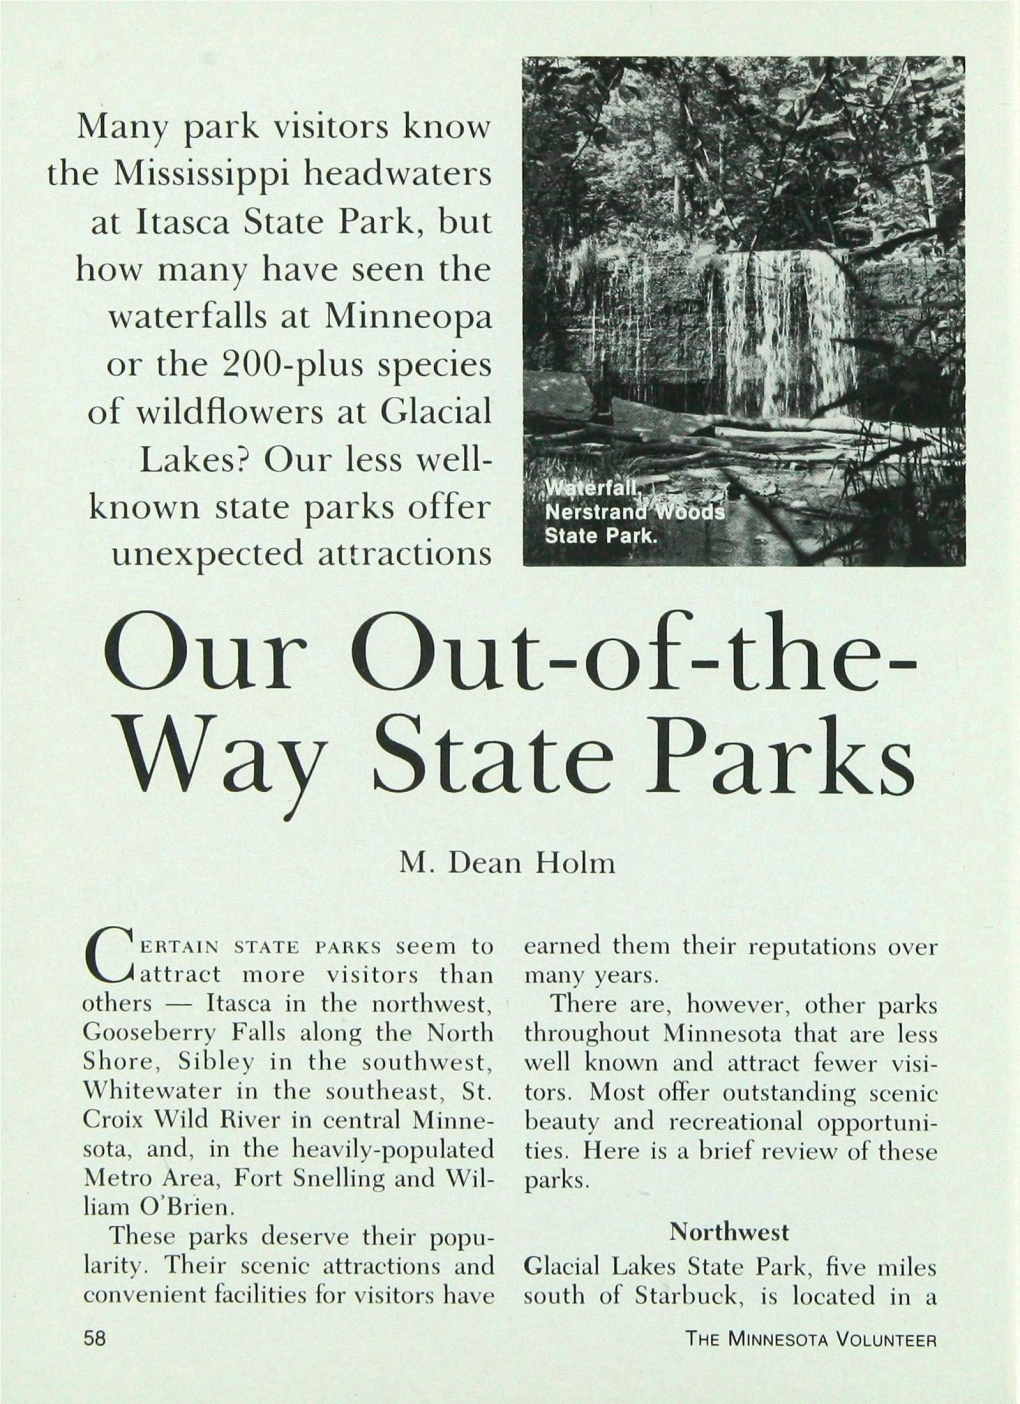 Way State Parks